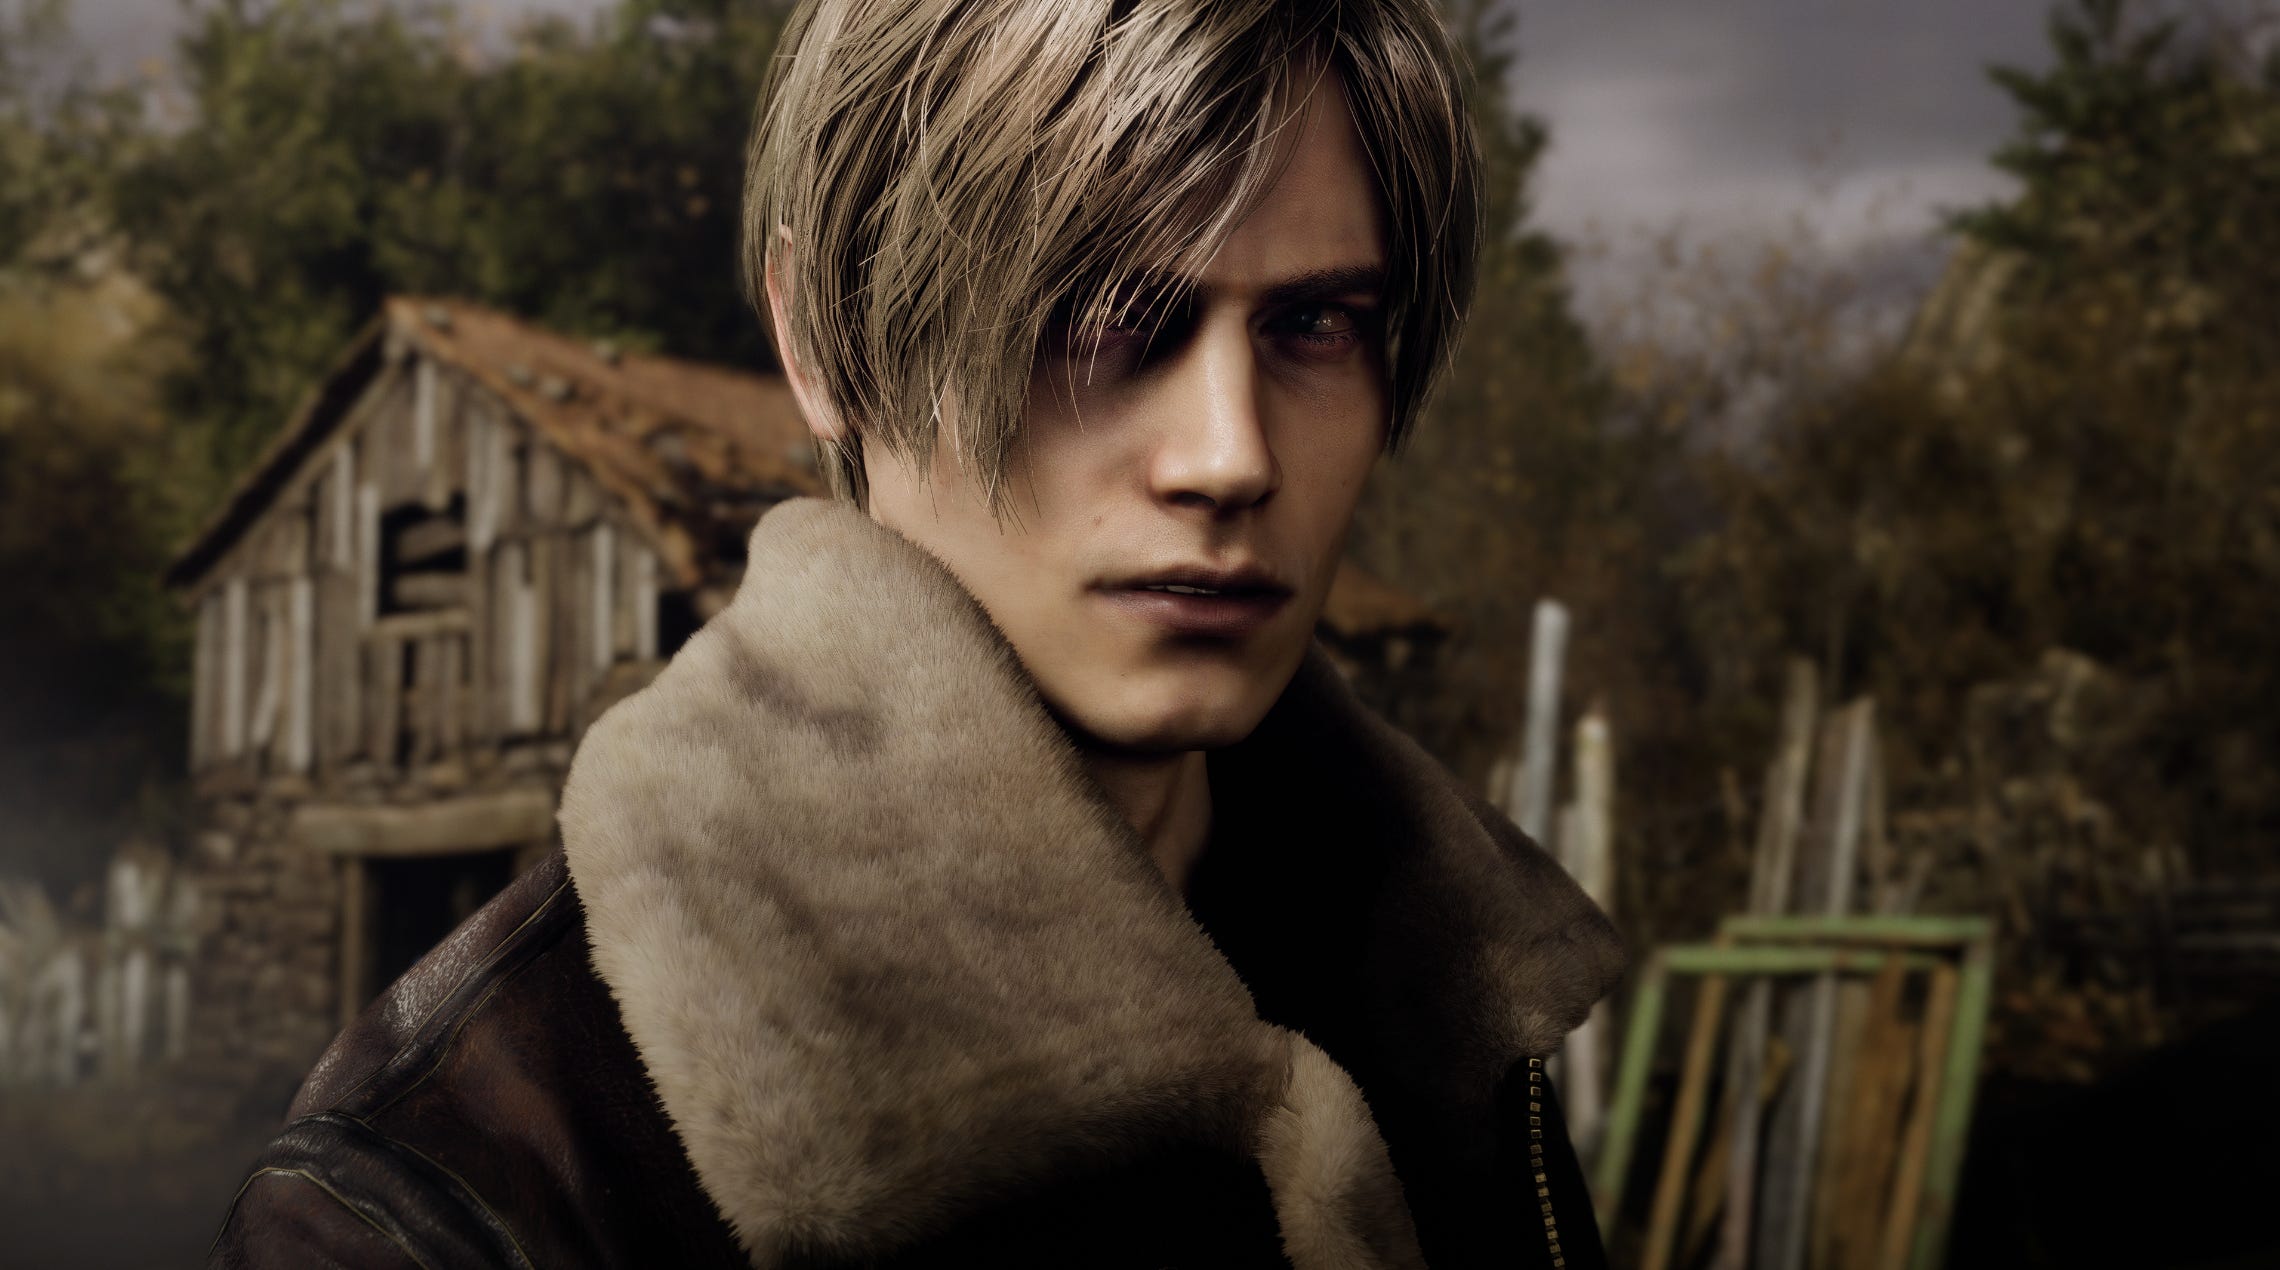 Game review: Resident Evil 4 remake is a masterpiece